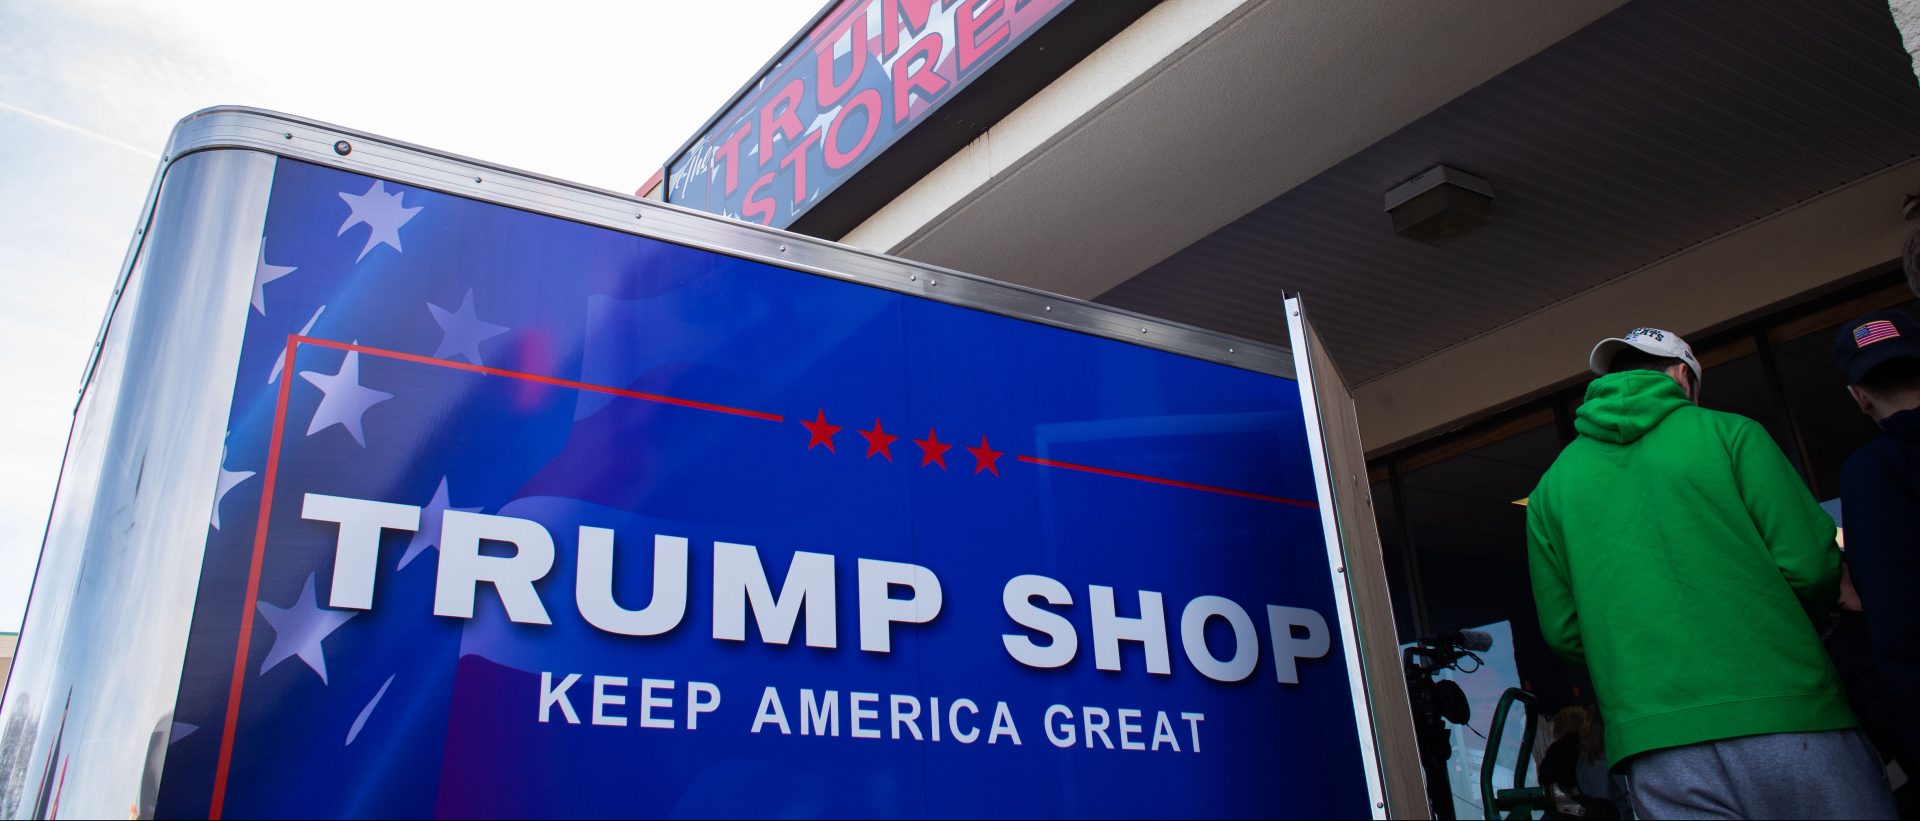 The Trump Store in Bensalem, PA saw large crowds of shoppers this Saturday.